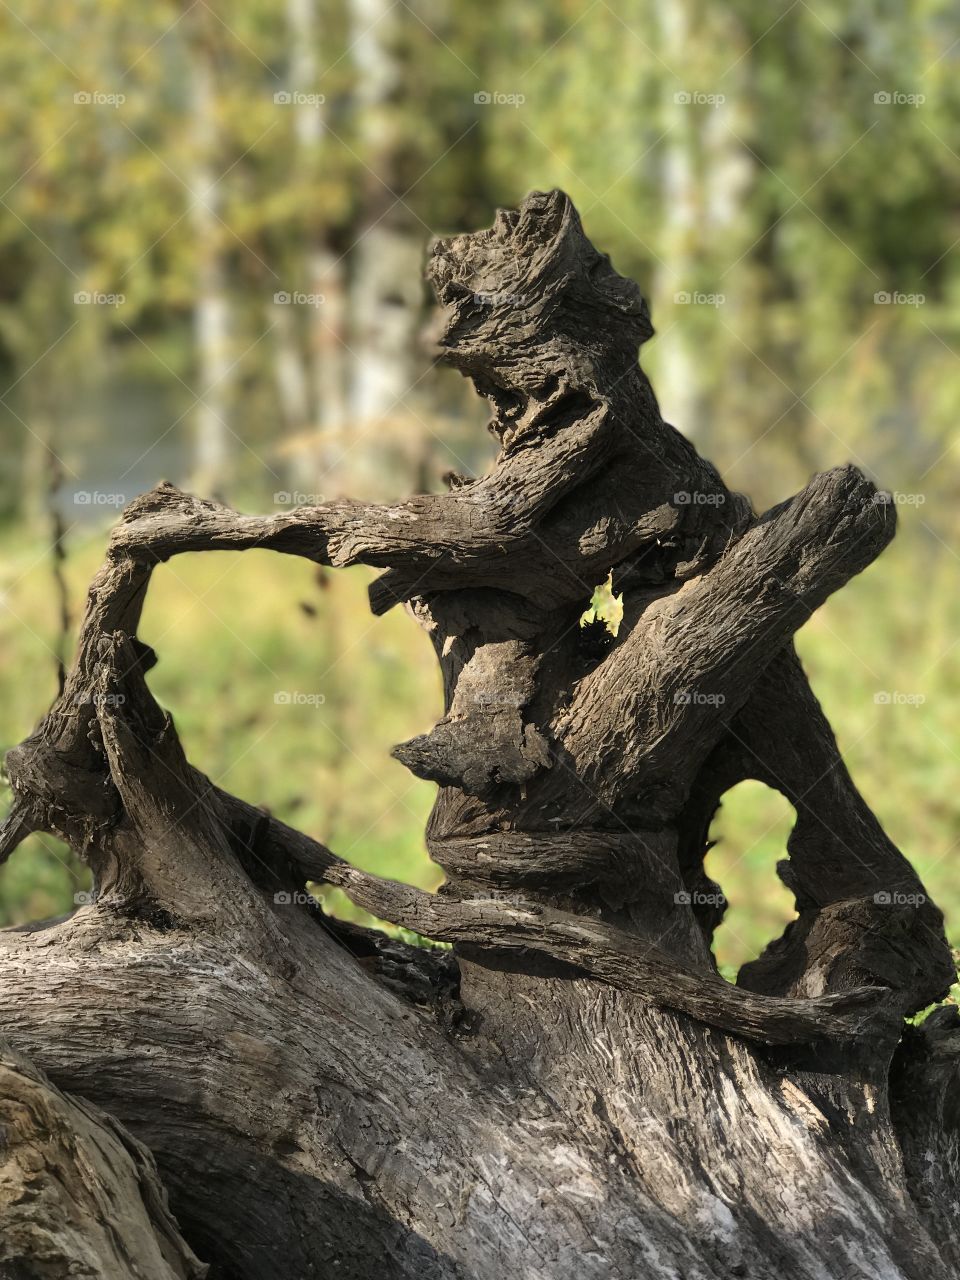 Nature is the best sculptor! The snag turned out to be a sculpture. Or maybe it's the devil?